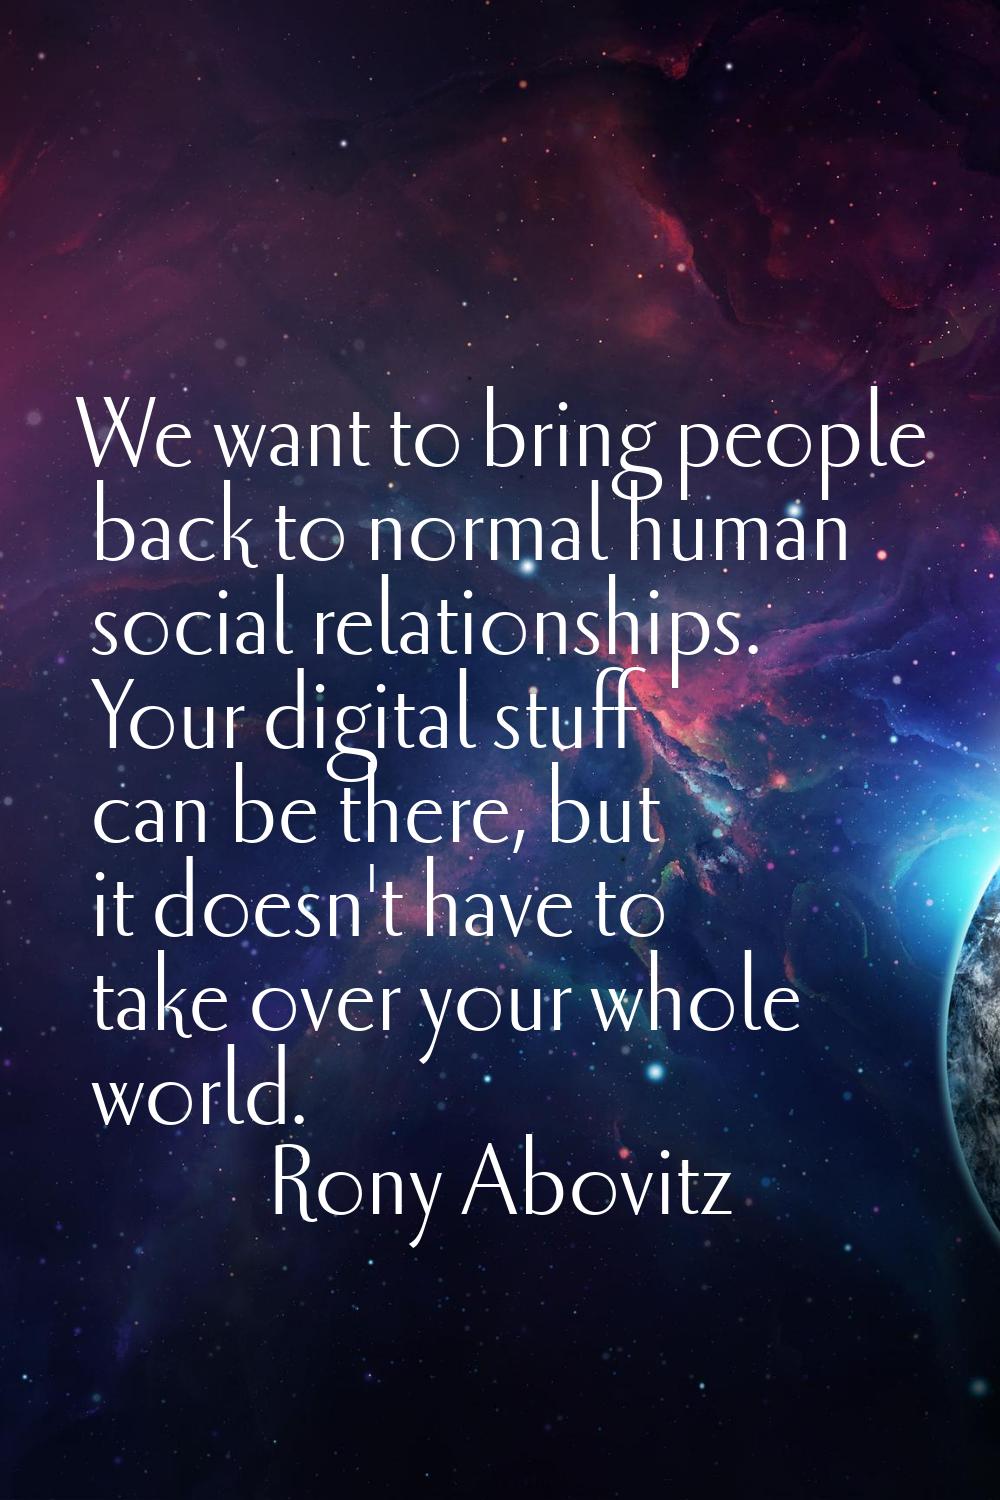 We want to bring people back to normal human social relationships. Your digital stuff can be there,